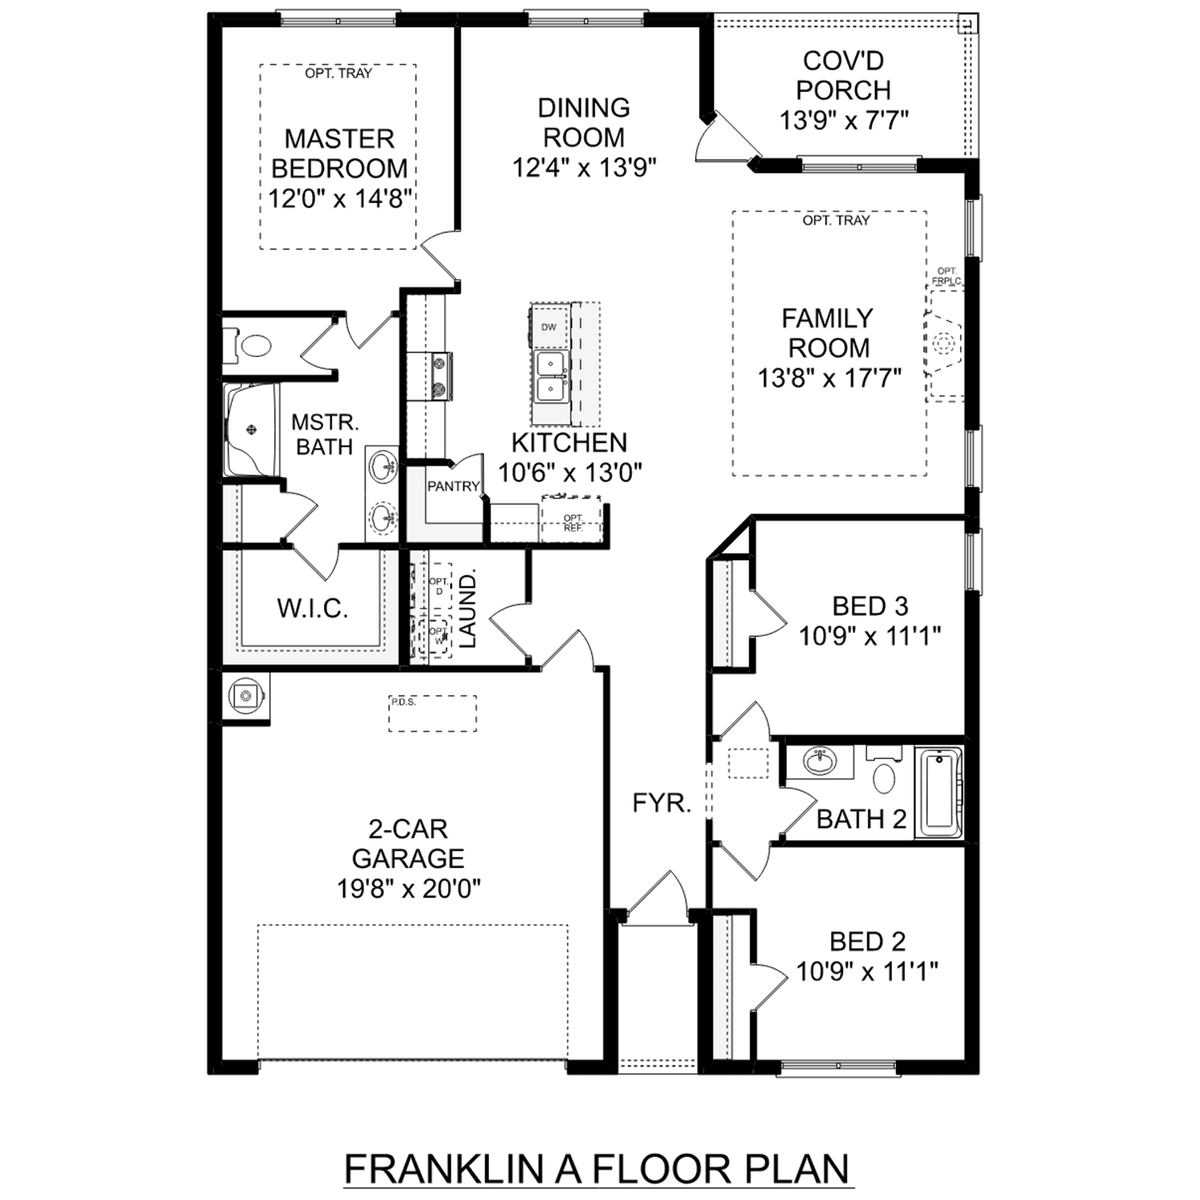 1 - The Franklin floor plan layout for 137 River Springs Court in Davidson Homes' Flint Meadows community.